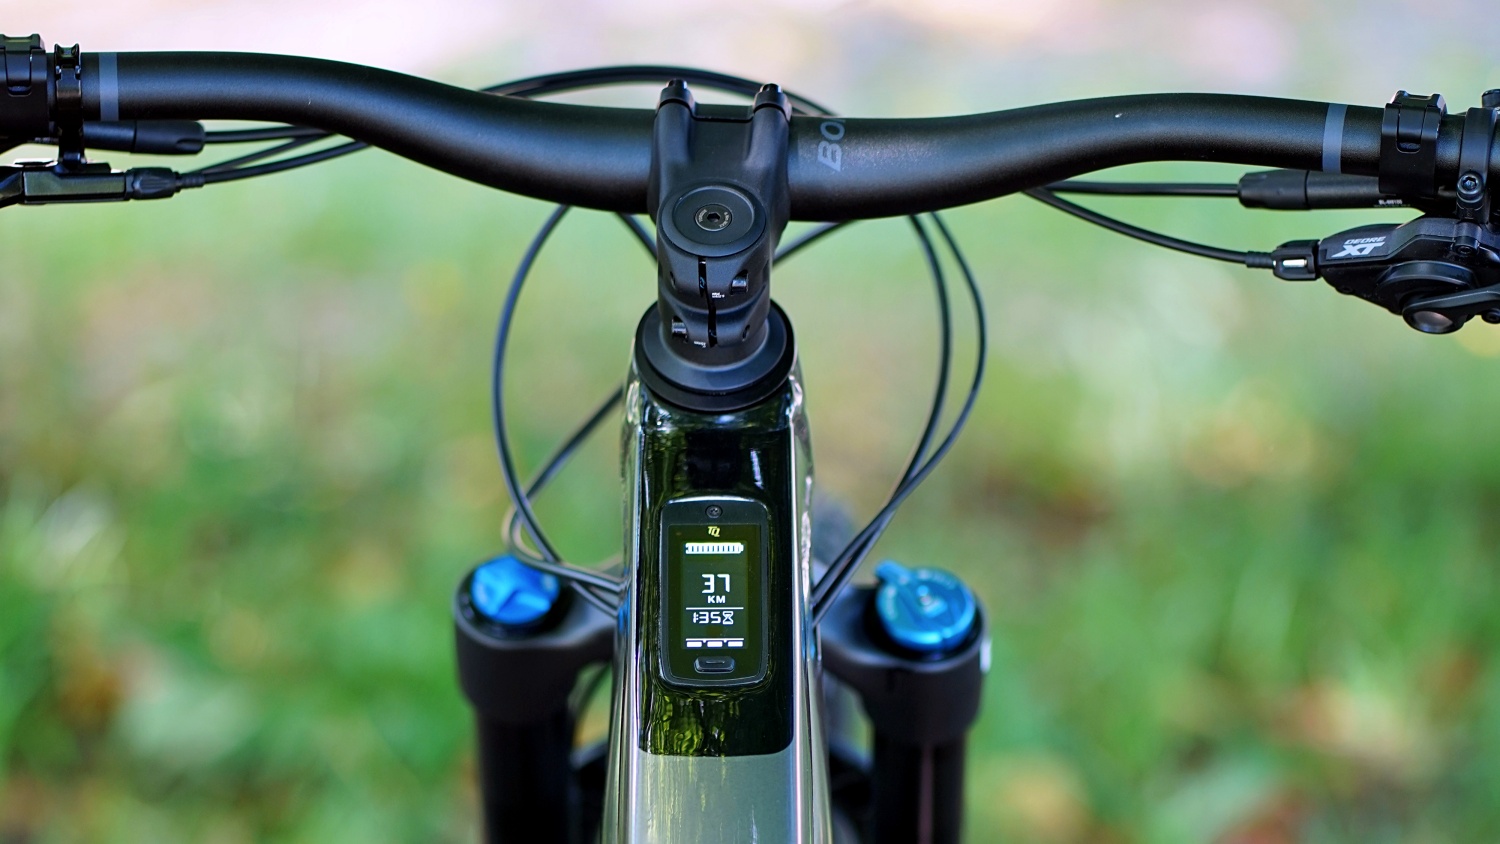 The display is neatly integrated in the top tube.